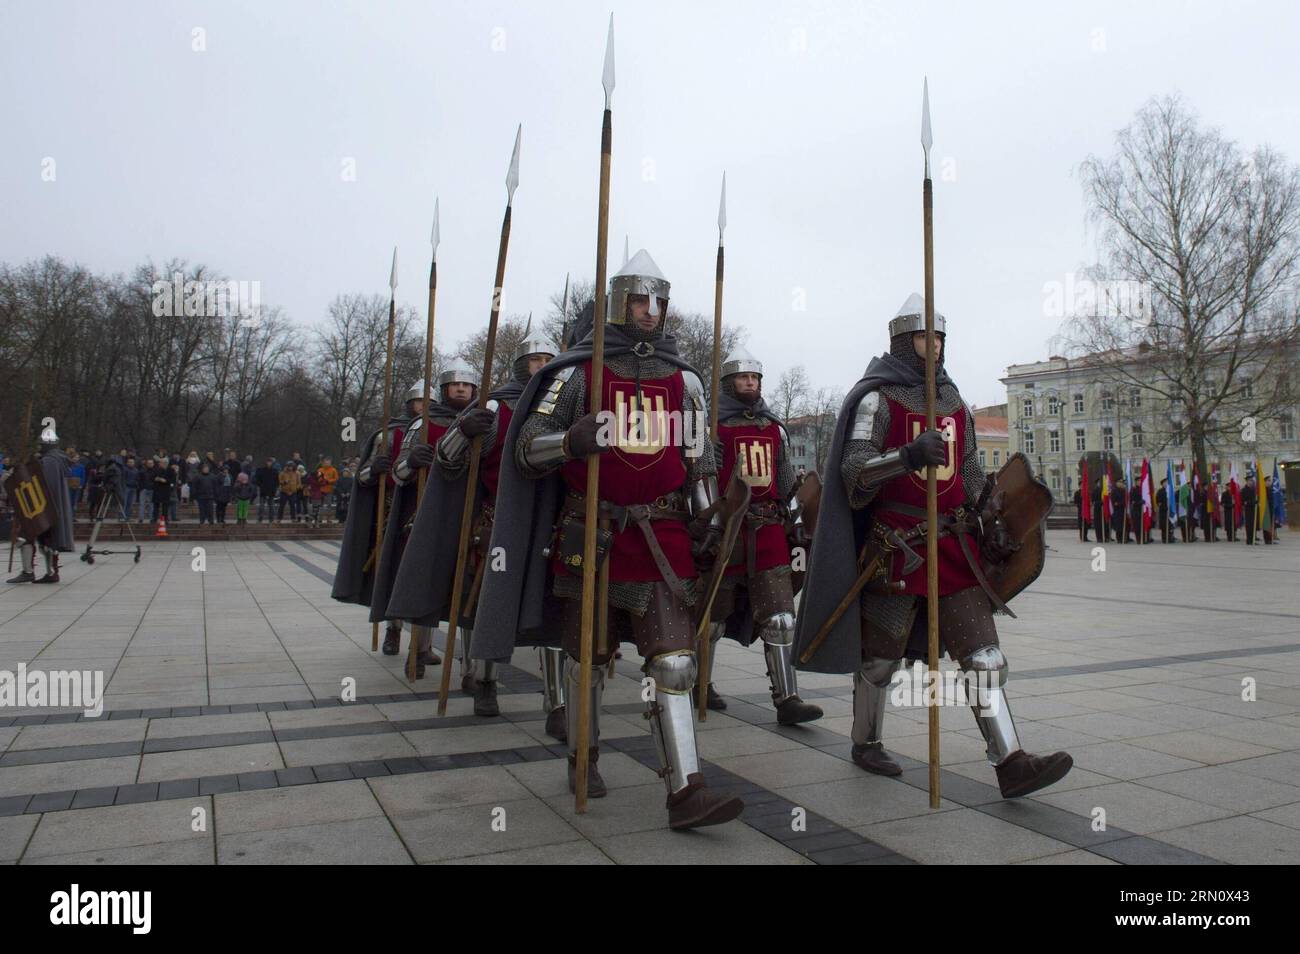 (141123) -- VILNIUS, Nov. 23, 2014 -- Soldiers in ancient military uniforms attend the celebration with a formation in Vilnius, Lithuania, on Nov. 23, 2014. Lithuanian armed forces and troops of some NATO member countries held a gala with formation on Sunday to celebrate the Armed Forces Day. Lithuania s first decree on establishing armed forces was approved on Nov. 23, 1918, which became the Armed Forces Day of the Baltic country. )(bxq) LITHUANIA-VILNIUS-ARMED FORCES DAY AlfredasxPliadis PUBLICATIONxNOTxINxCHN   Vilnius Nov 23 2014 Soldiers in Ancient Military UNIFORMS attend The Celebration Stock Photo